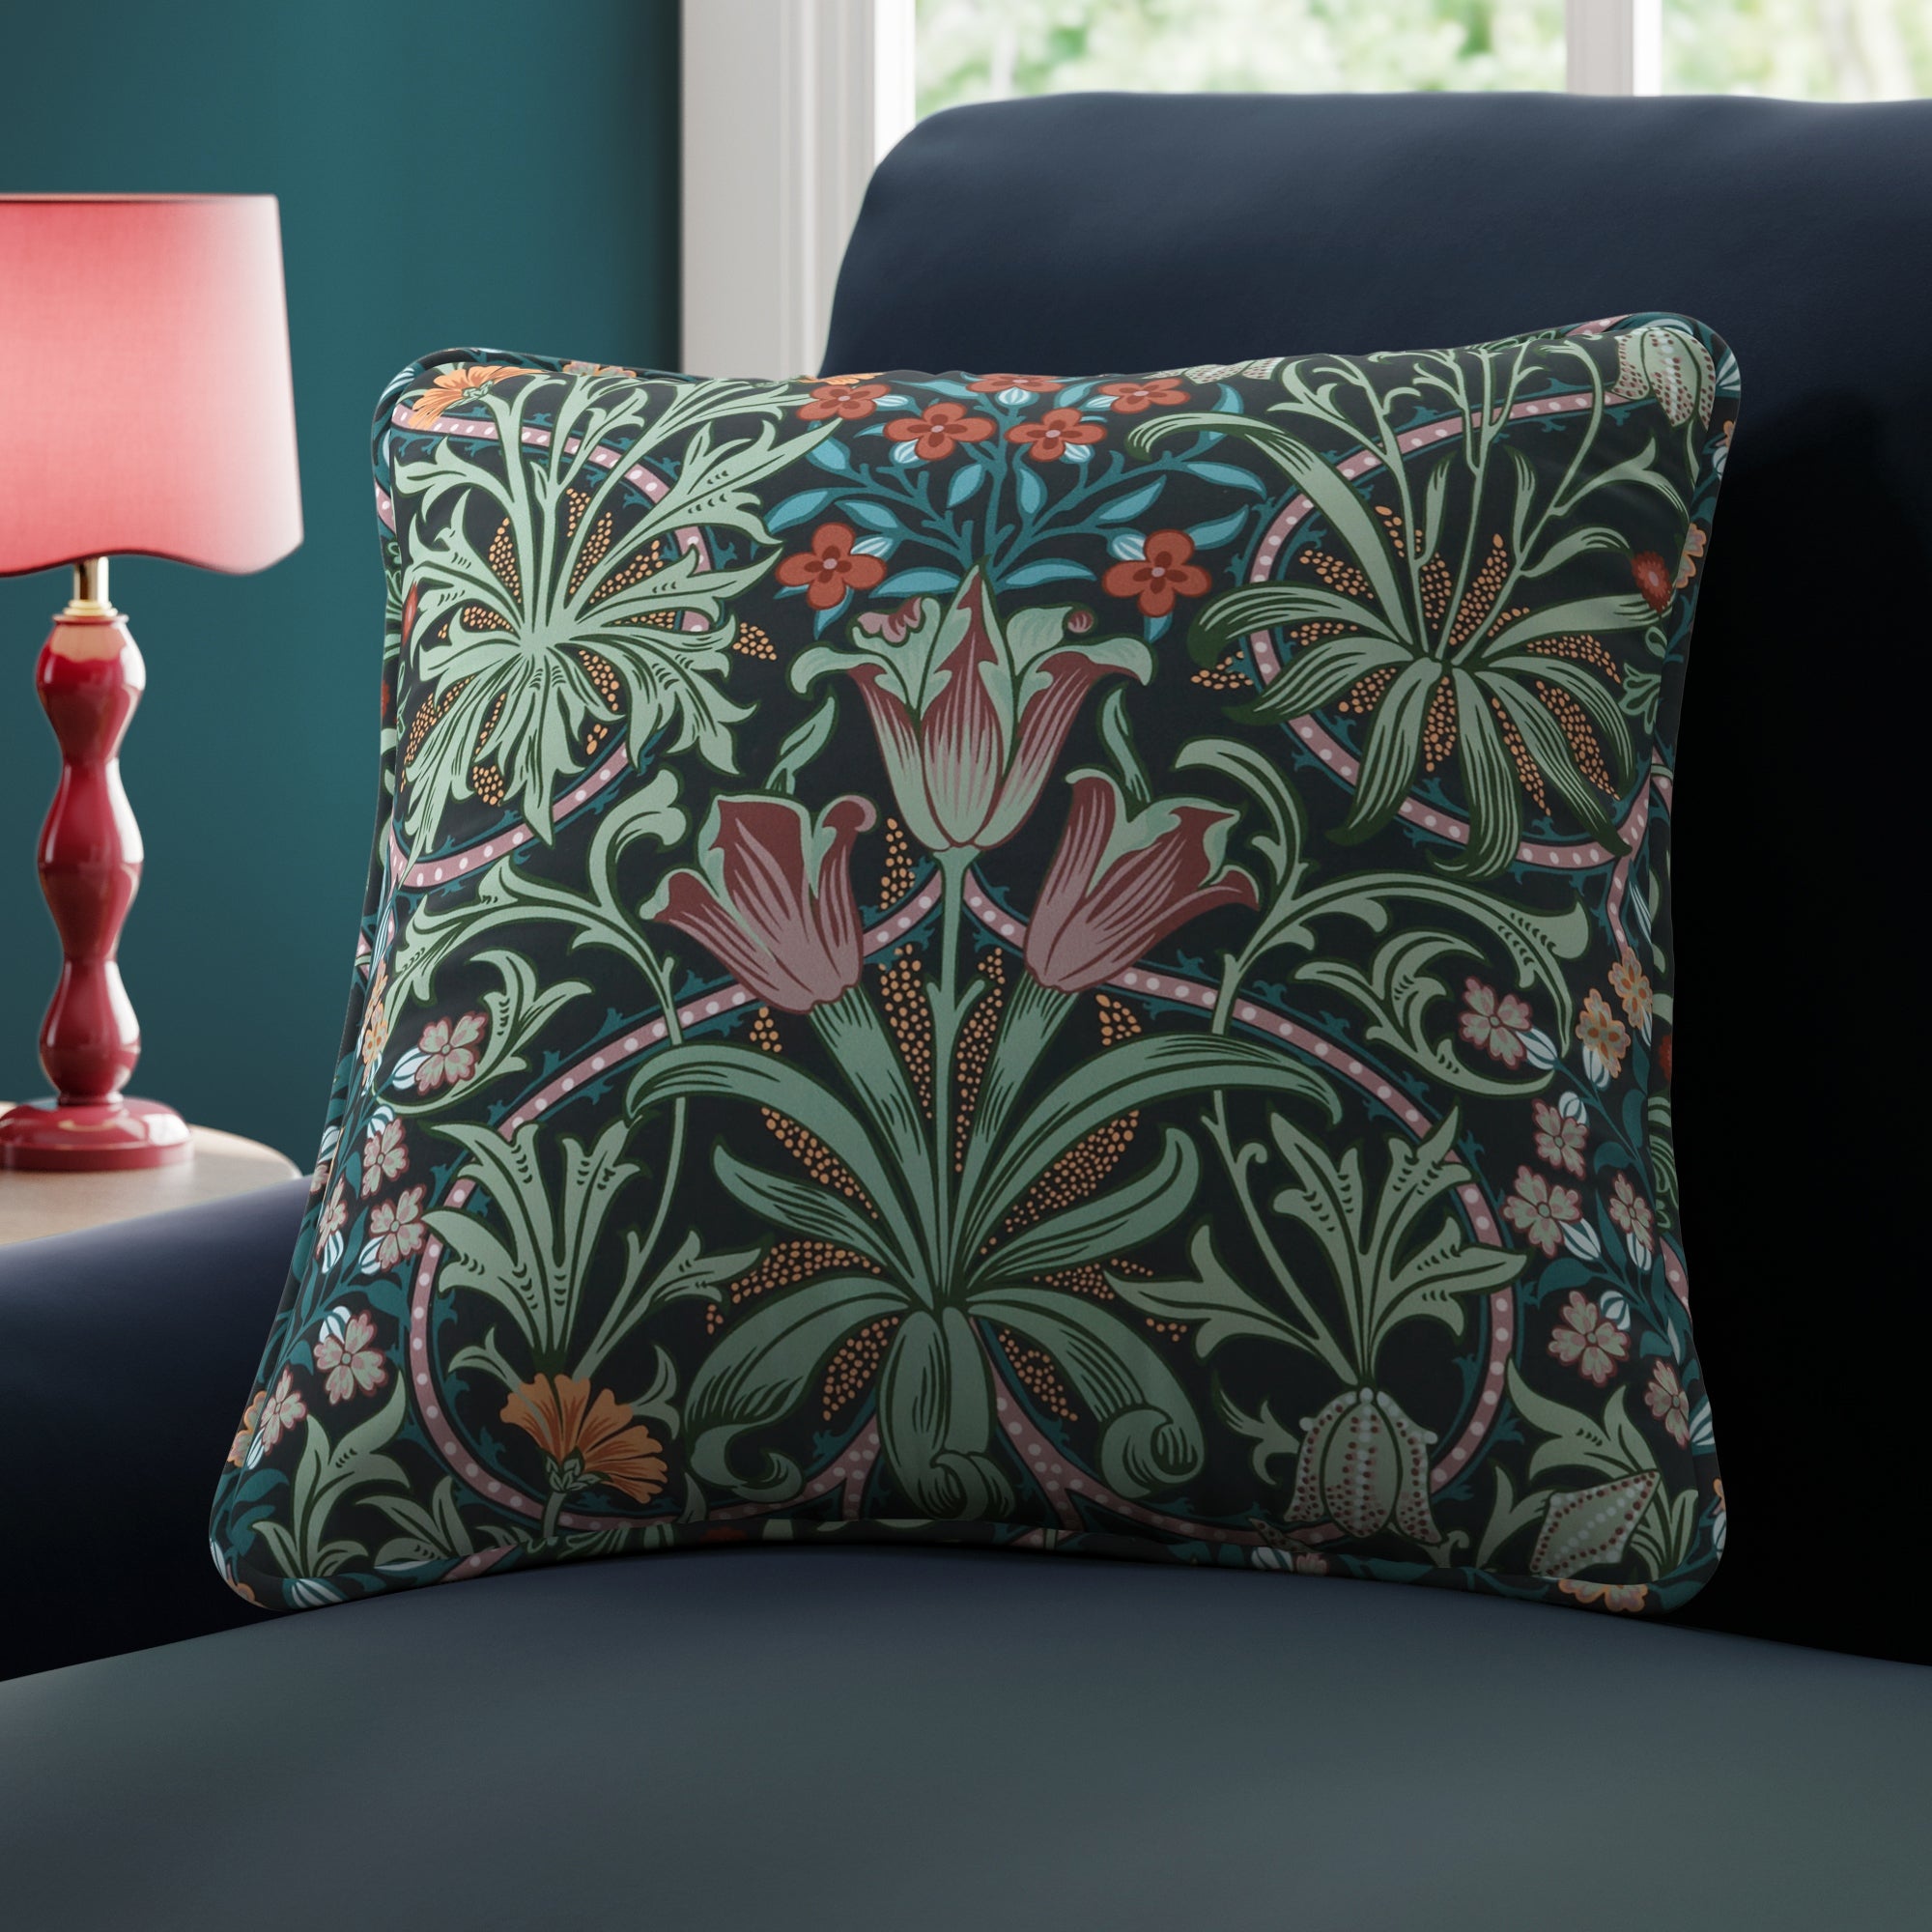 William Morris At Home Woodland Weeds Made To Measure Fabric Sample Woodland Weeds Dewberry